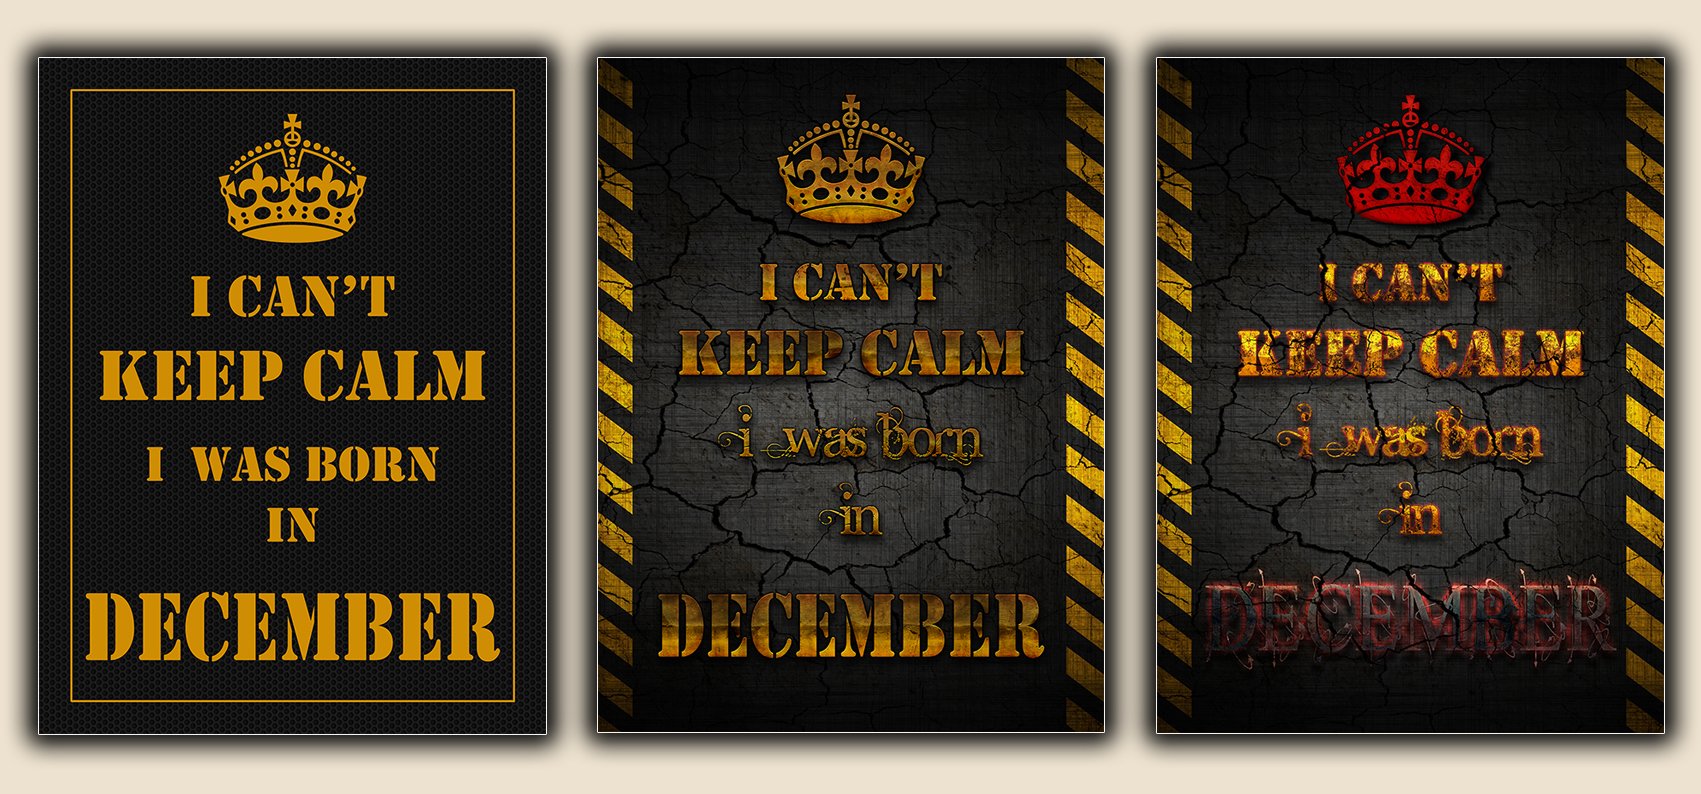 I Can't Keep Calm - I was Born in December